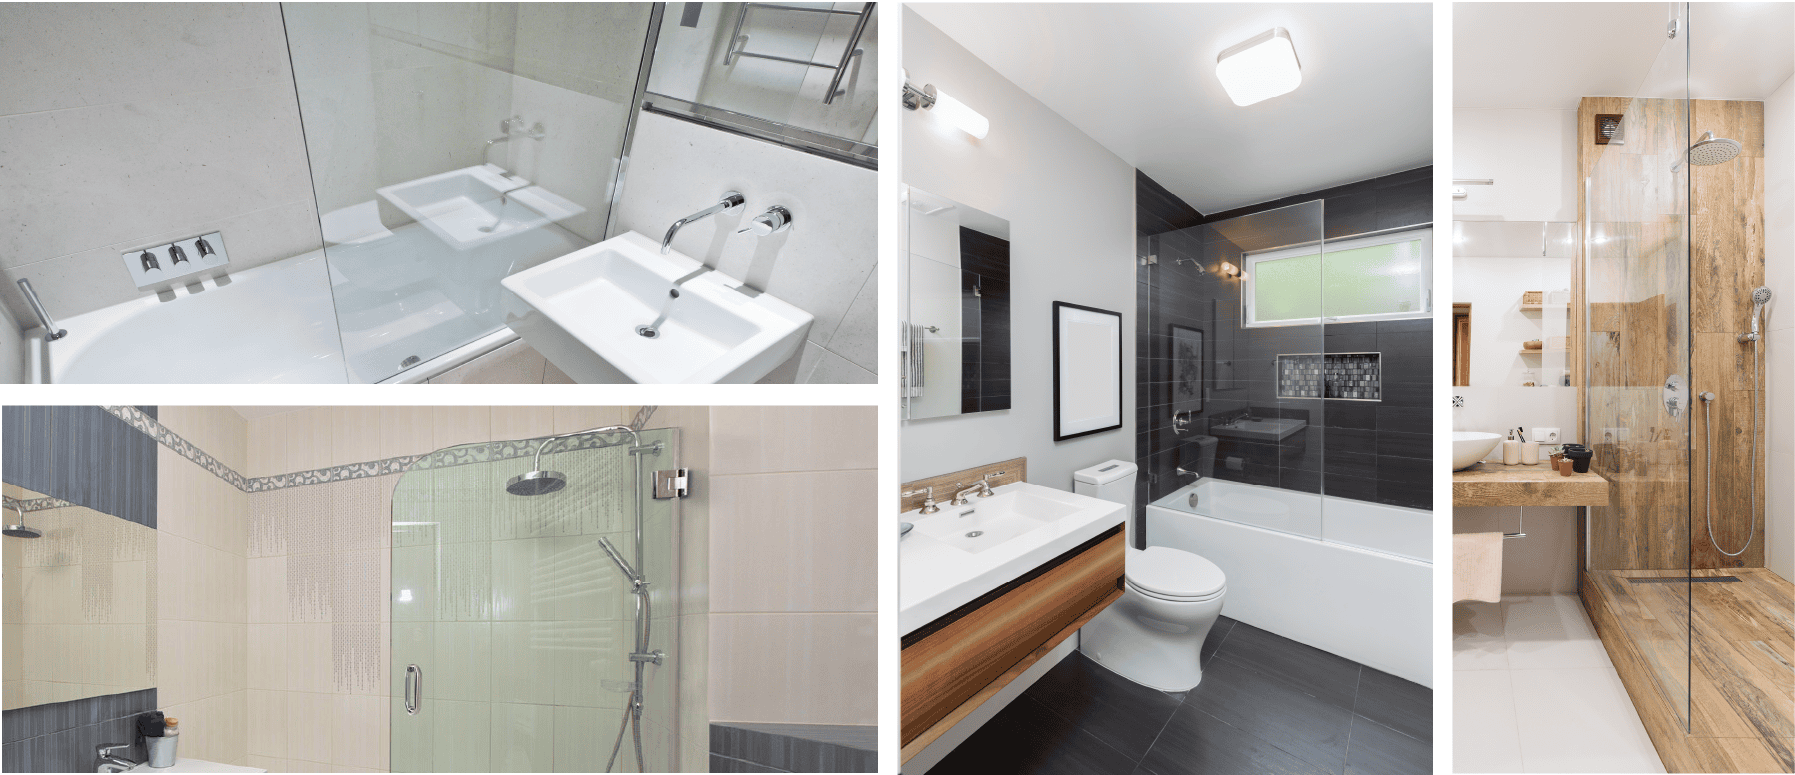 Four bathroom images with shower, toilet, sink, and glass doors.